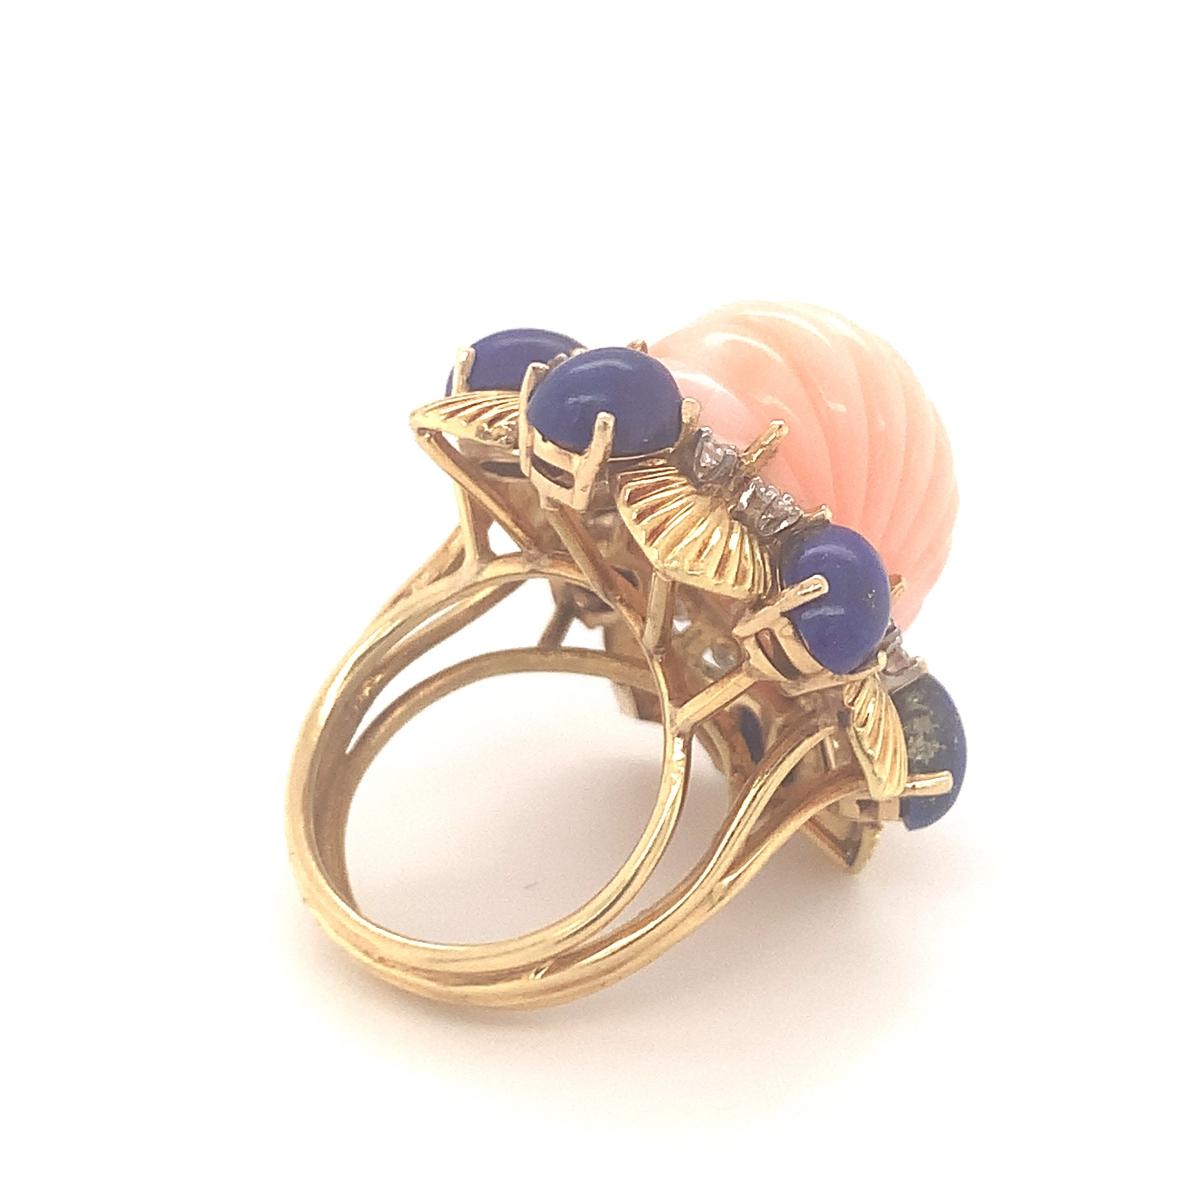 Oval Cut Pink Coral, Lapis Lazuli and Diamond Ring in 18K Yellow Gold, circa 1960s For Sale